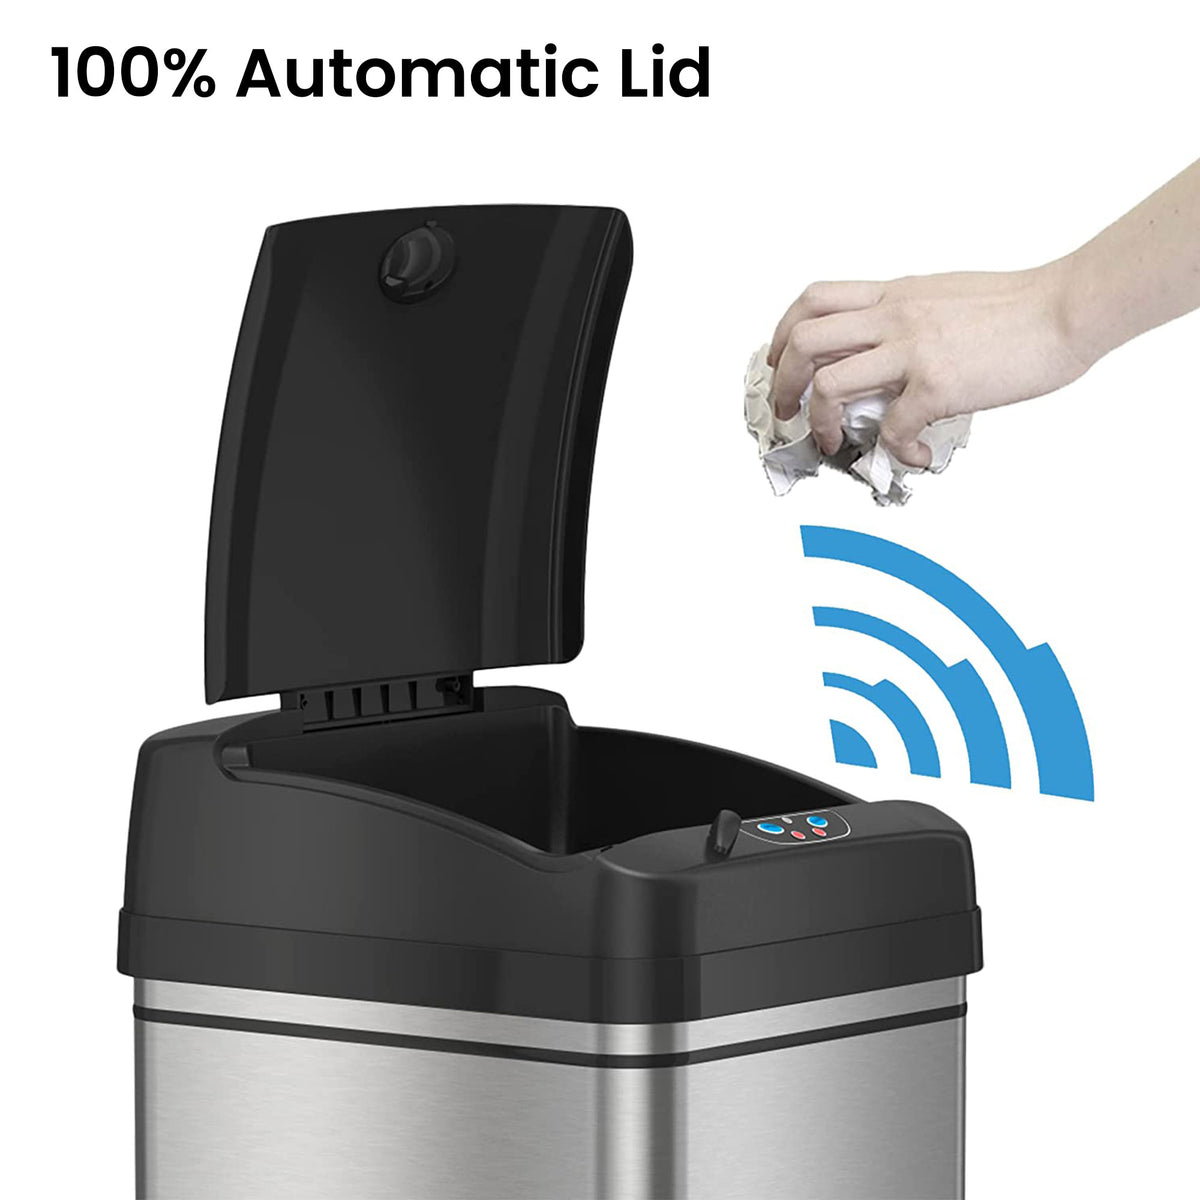 iTouchless Sensor Trash Can with Pet-Proof Lid 100% Automatic Lid